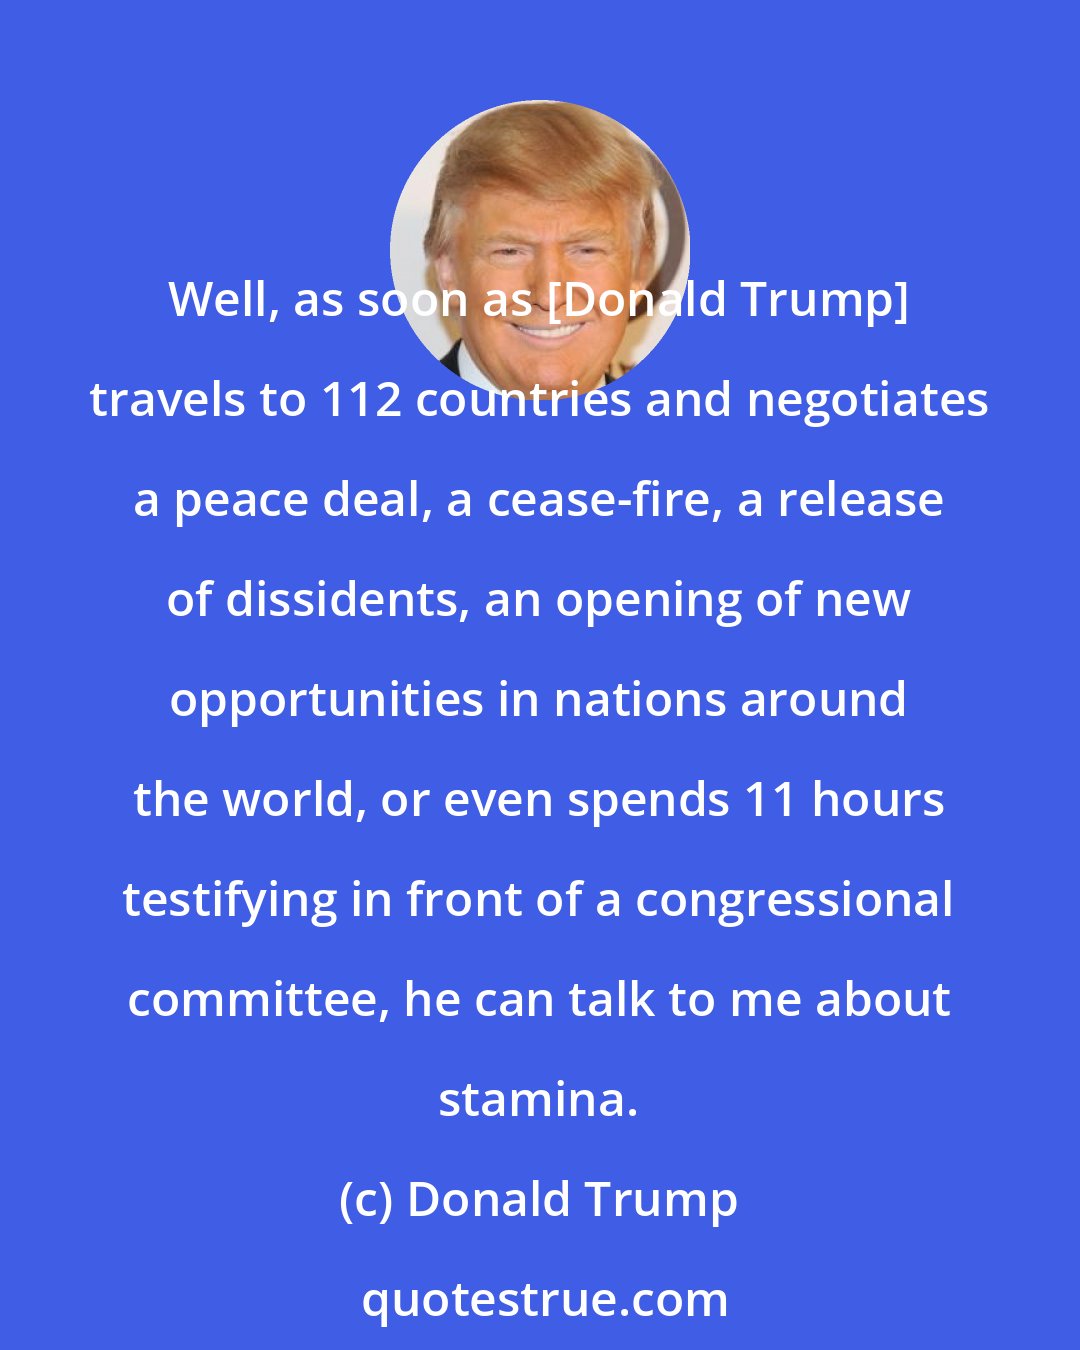 Donald Trump: Well, as soon as [Donald Trump] travels to 112 countries and negotiates a peace deal, a cease-fire, a release of dissidents, an opening of new opportunities in nations around the world, or even spends 11 hours testifying in front of a congressional committee, he can talk to me about stamina.